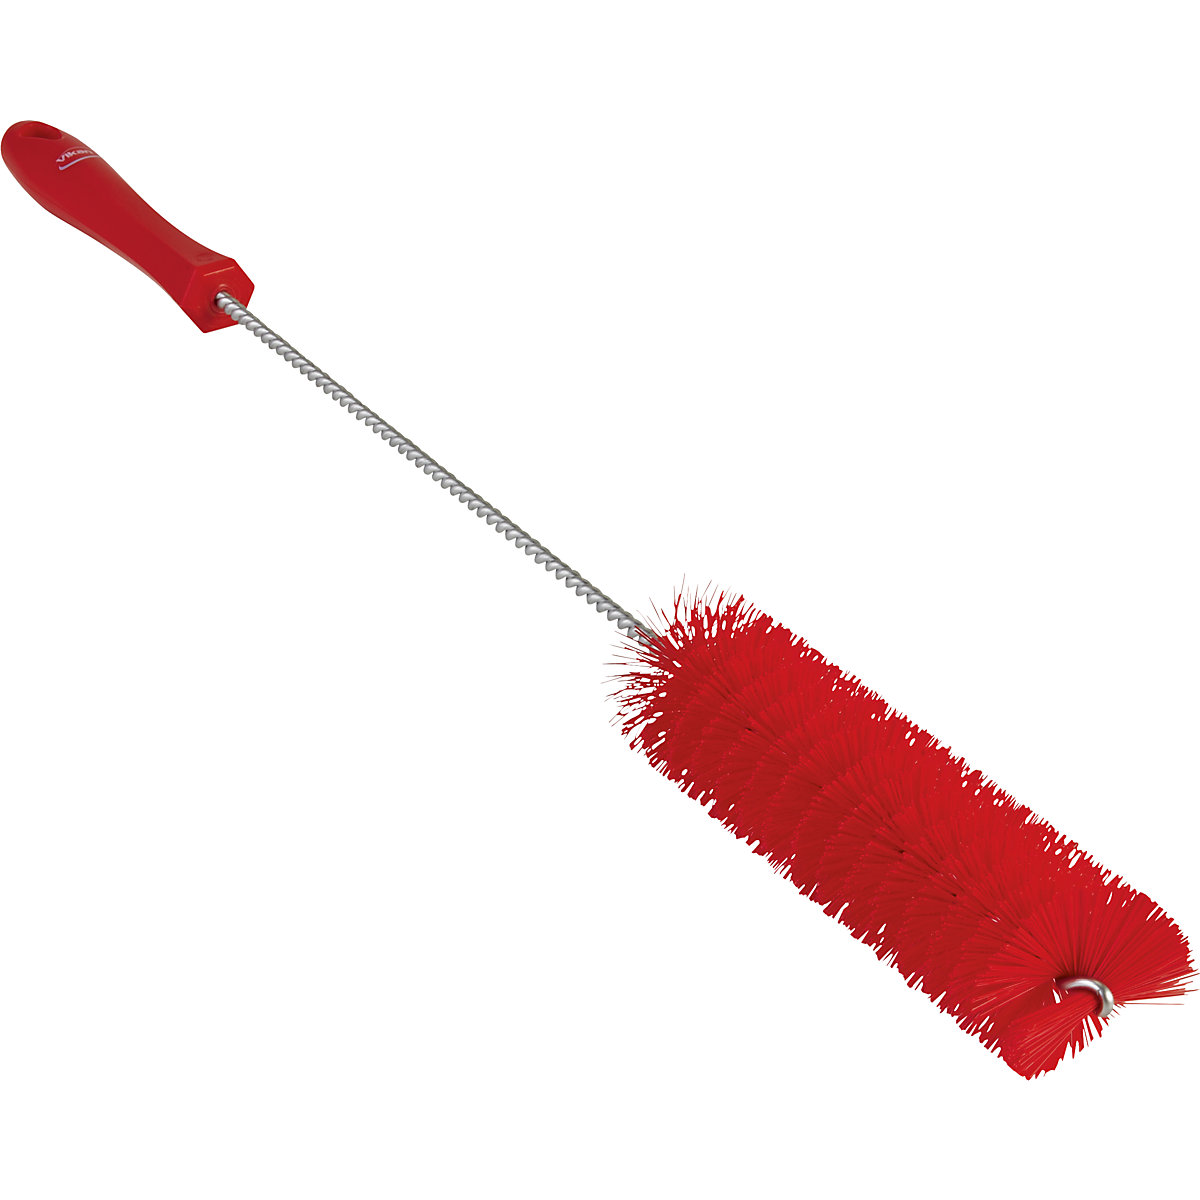 Vikan – Pipe brush with handle, hard, Ø 40 mm, pack of 15, red